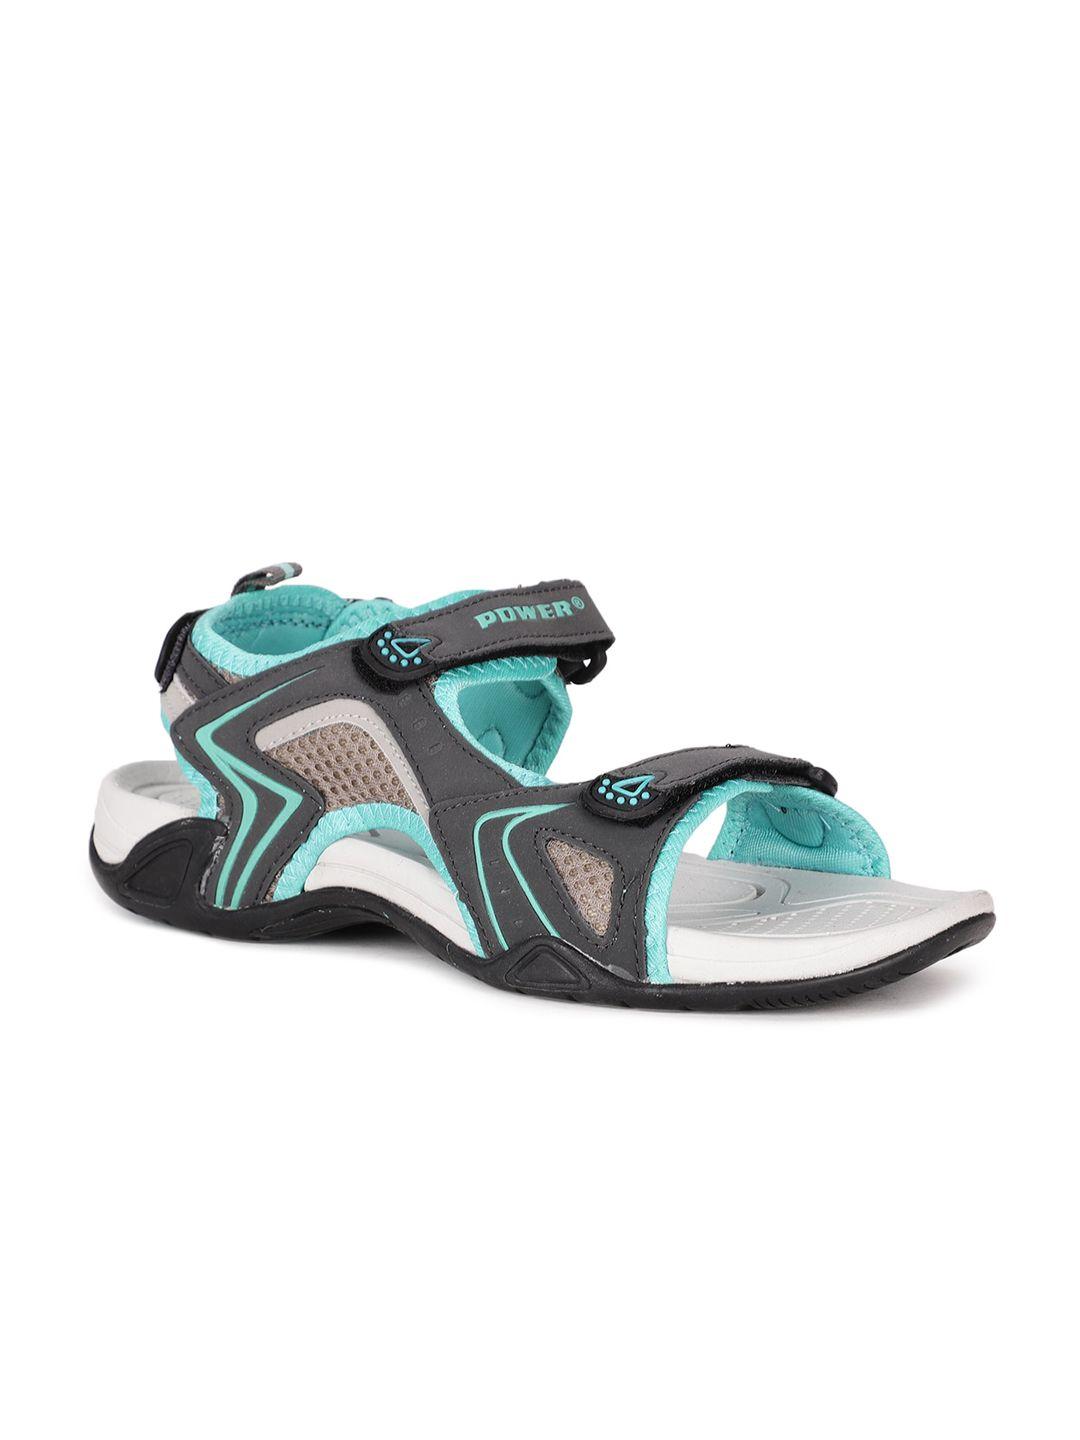 power women blue and grey solid sports sandals